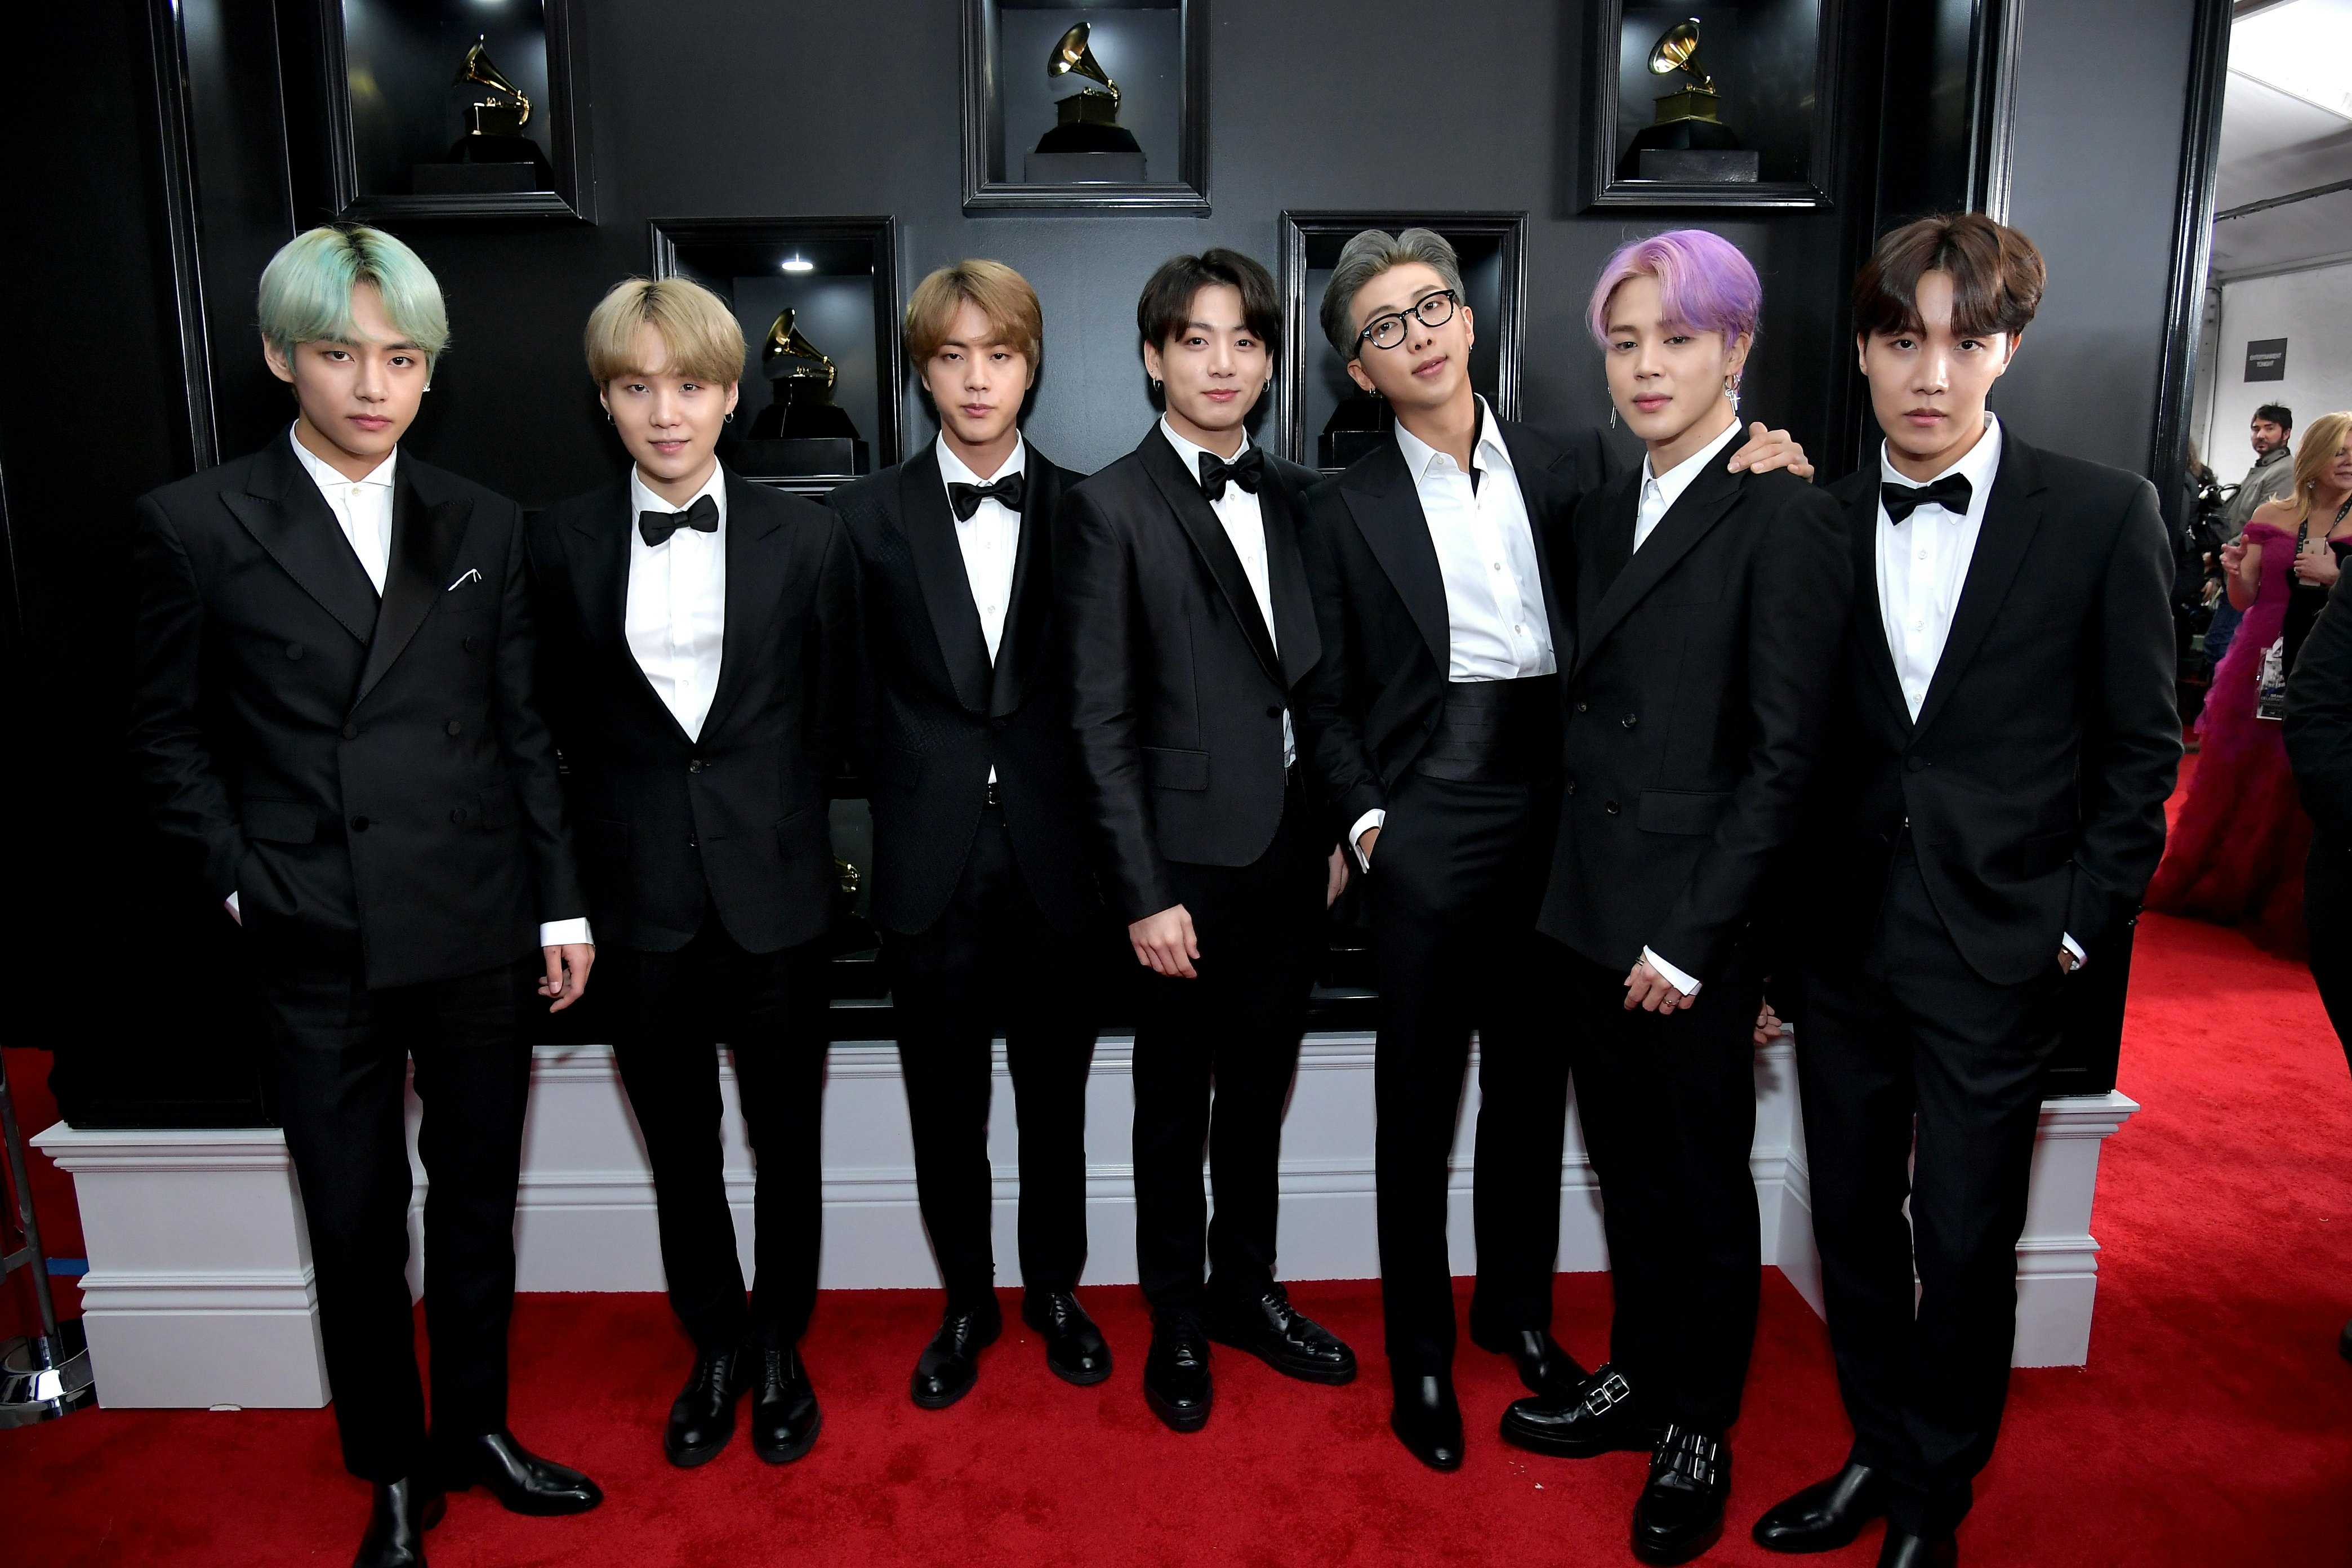 Will BTS Be At The 2019 AMAs? Here's Why The Chances Are Slim